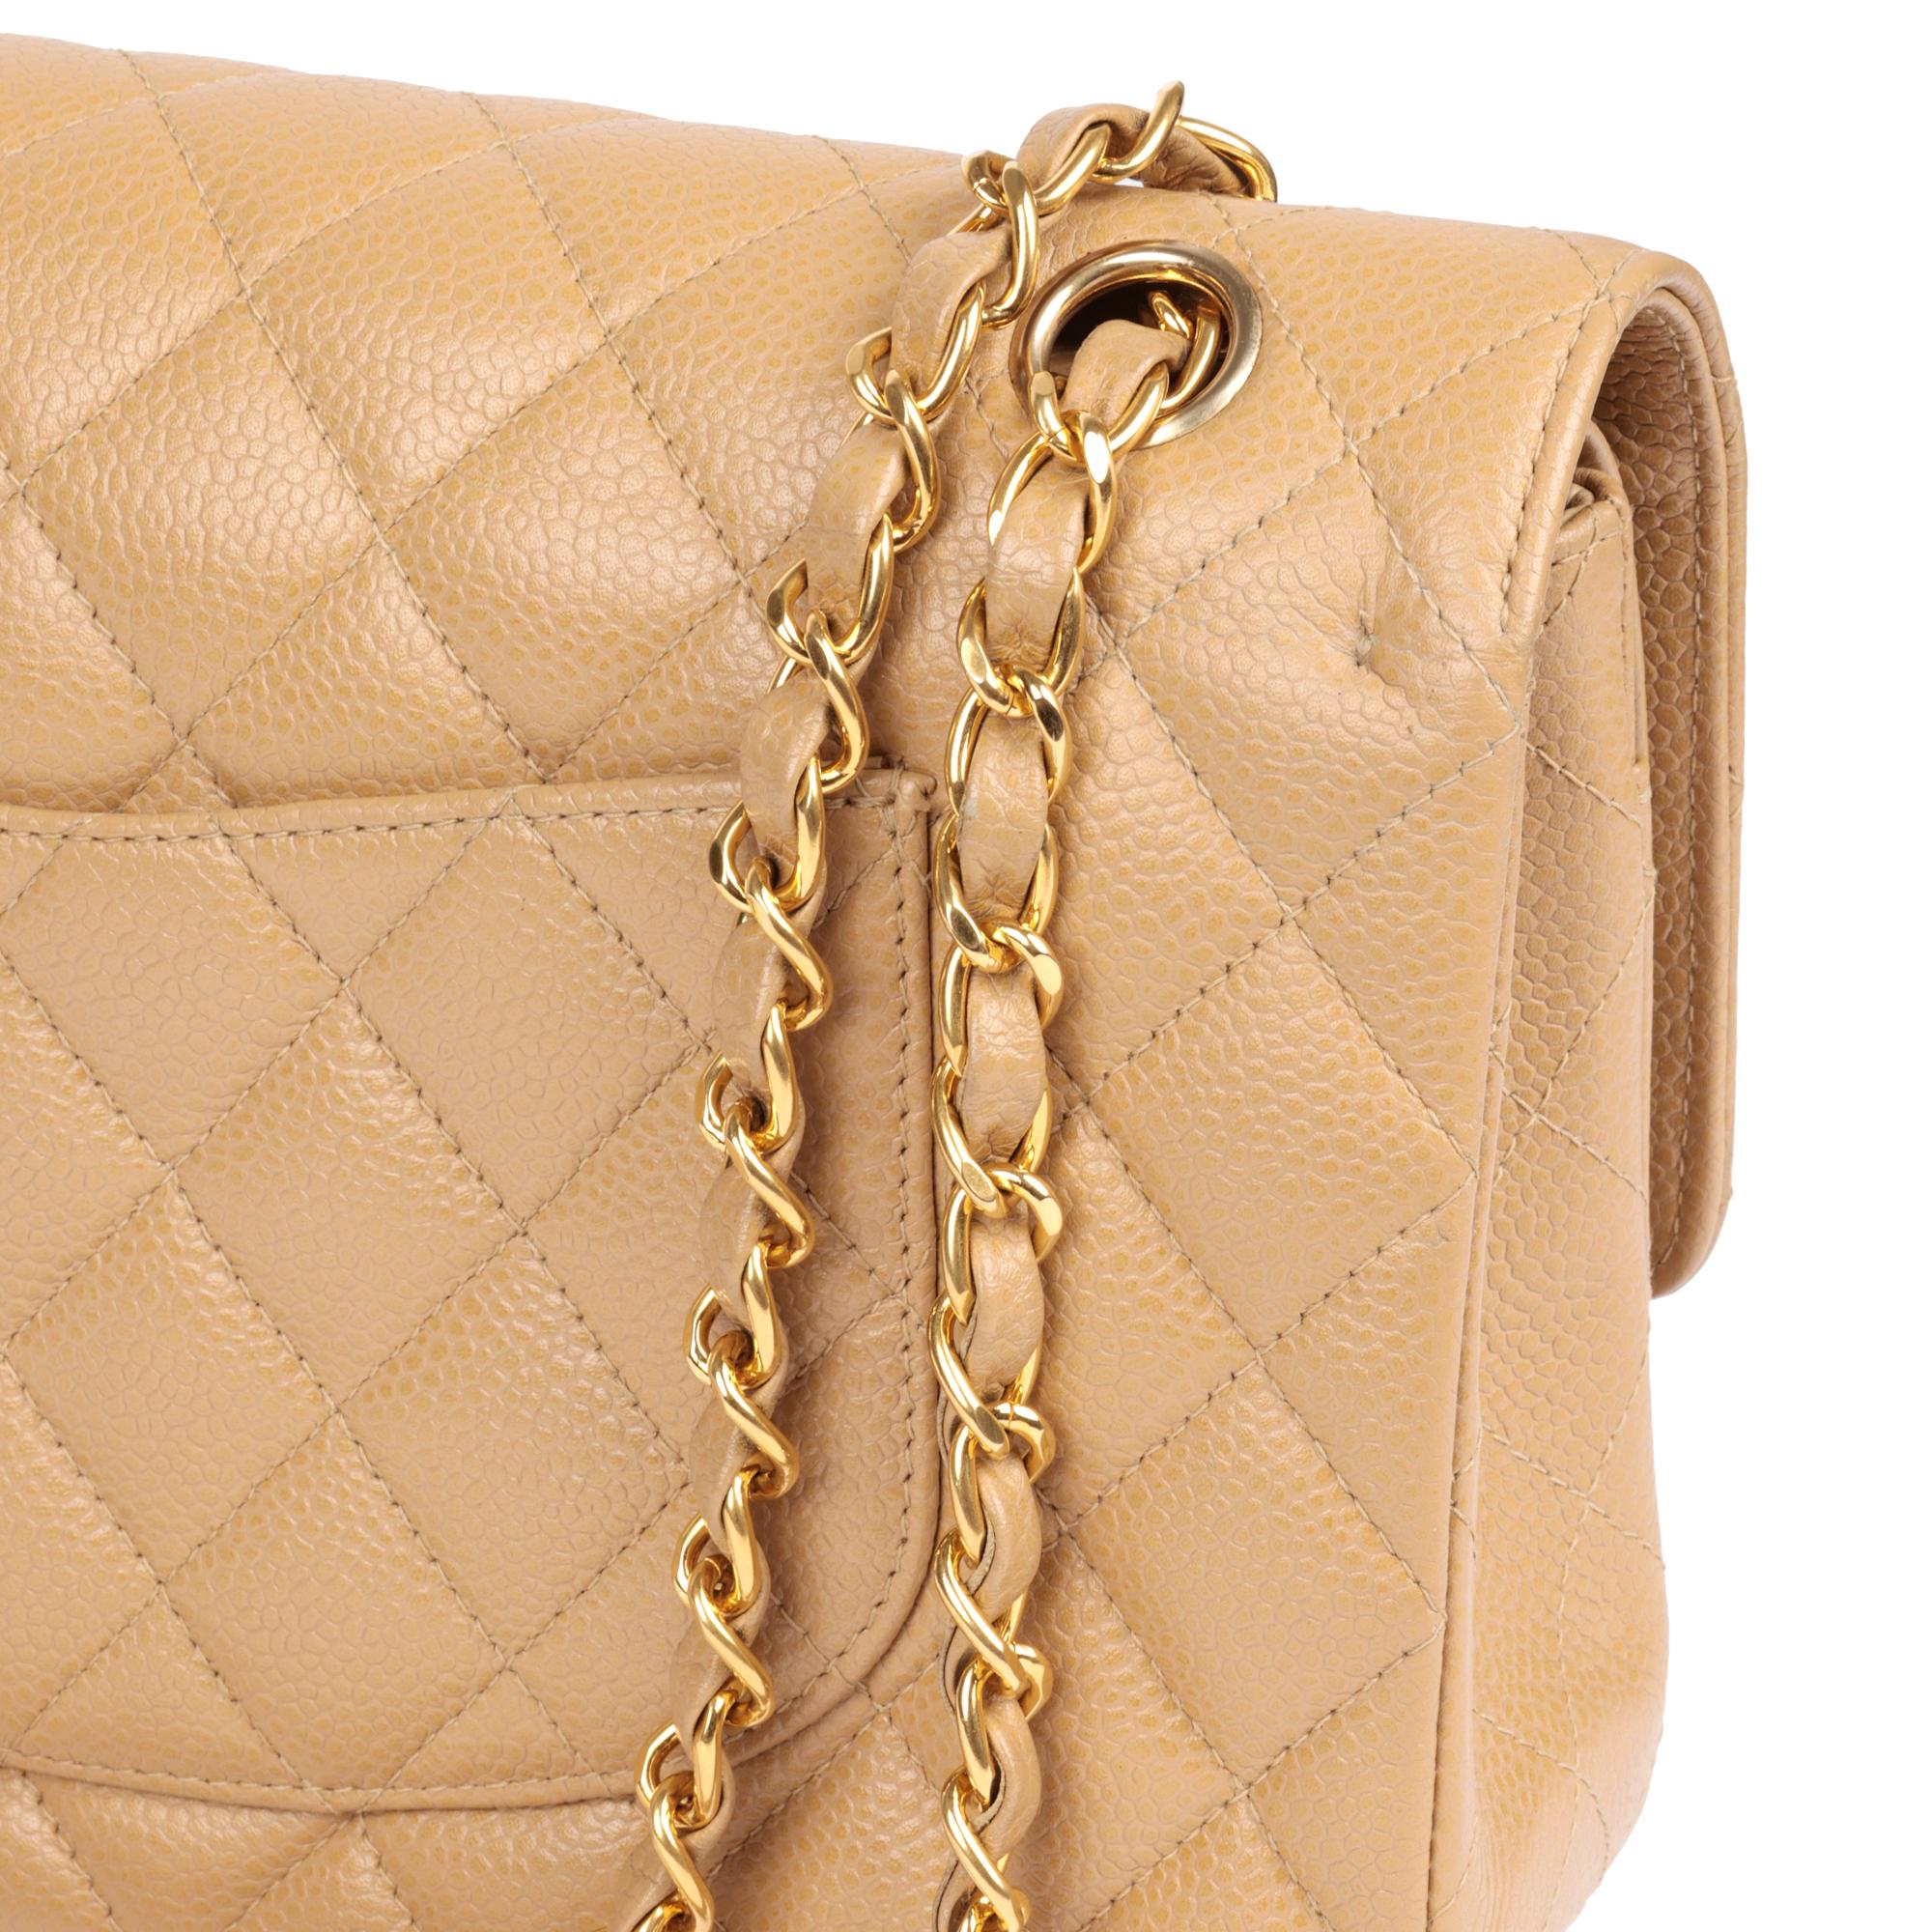 CHANEL Beige Quilted Caviar Leather Medium Classic Double Flap Bag  4